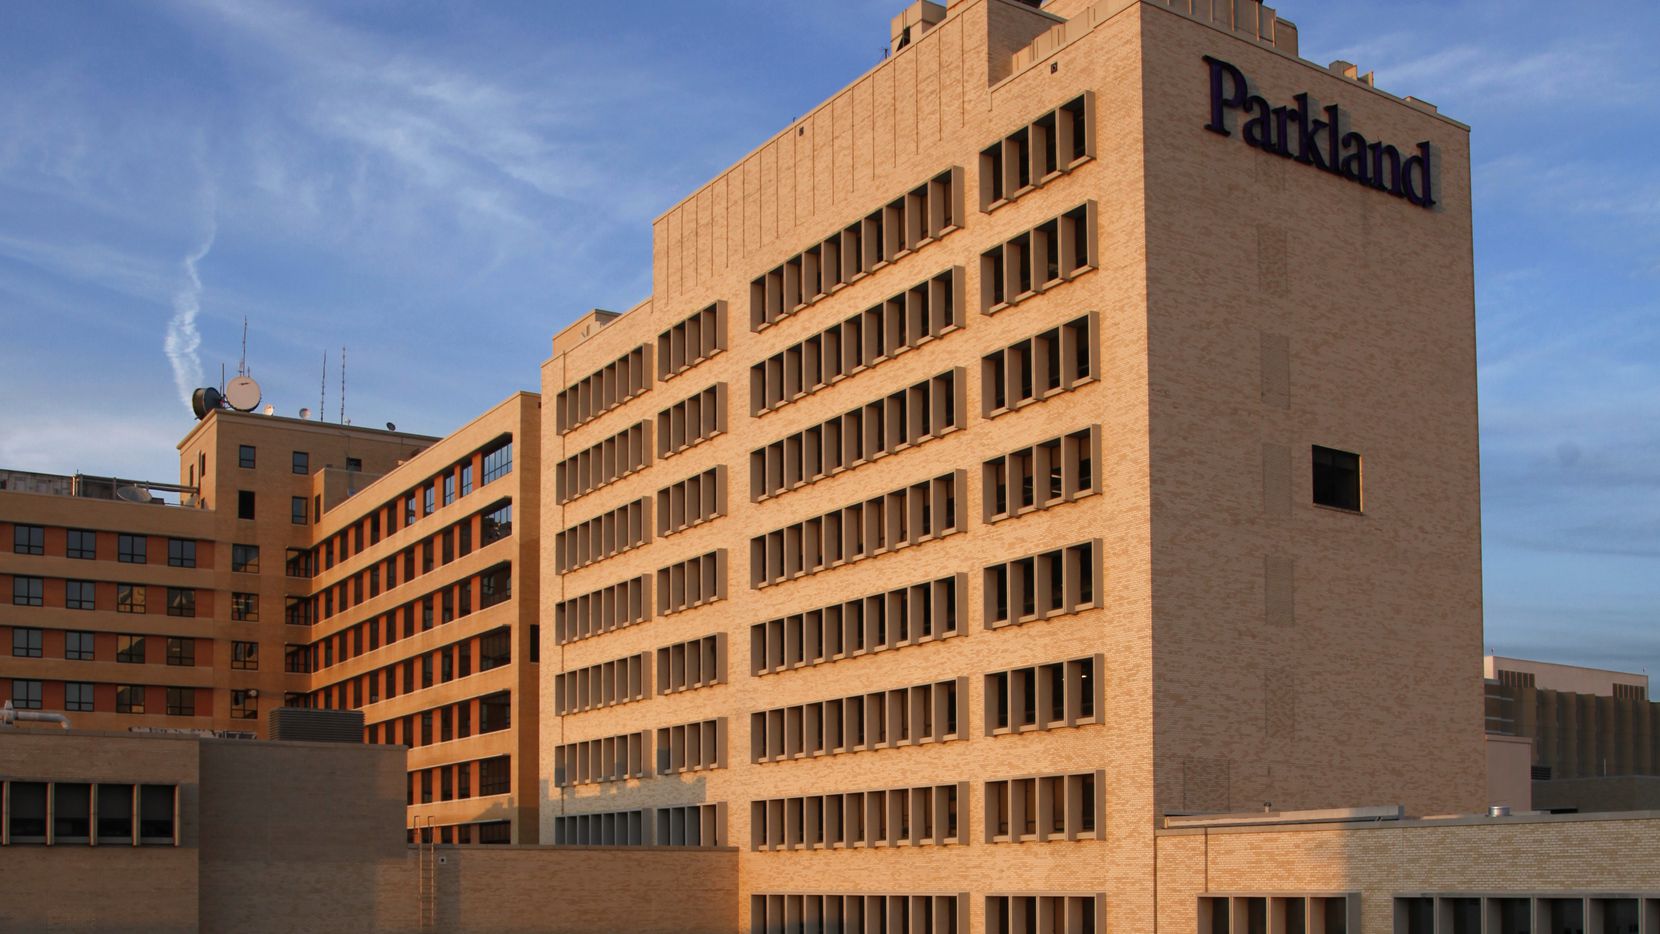 The old Parkland Hospital complex with more than 1 million square feet has been up for sale...